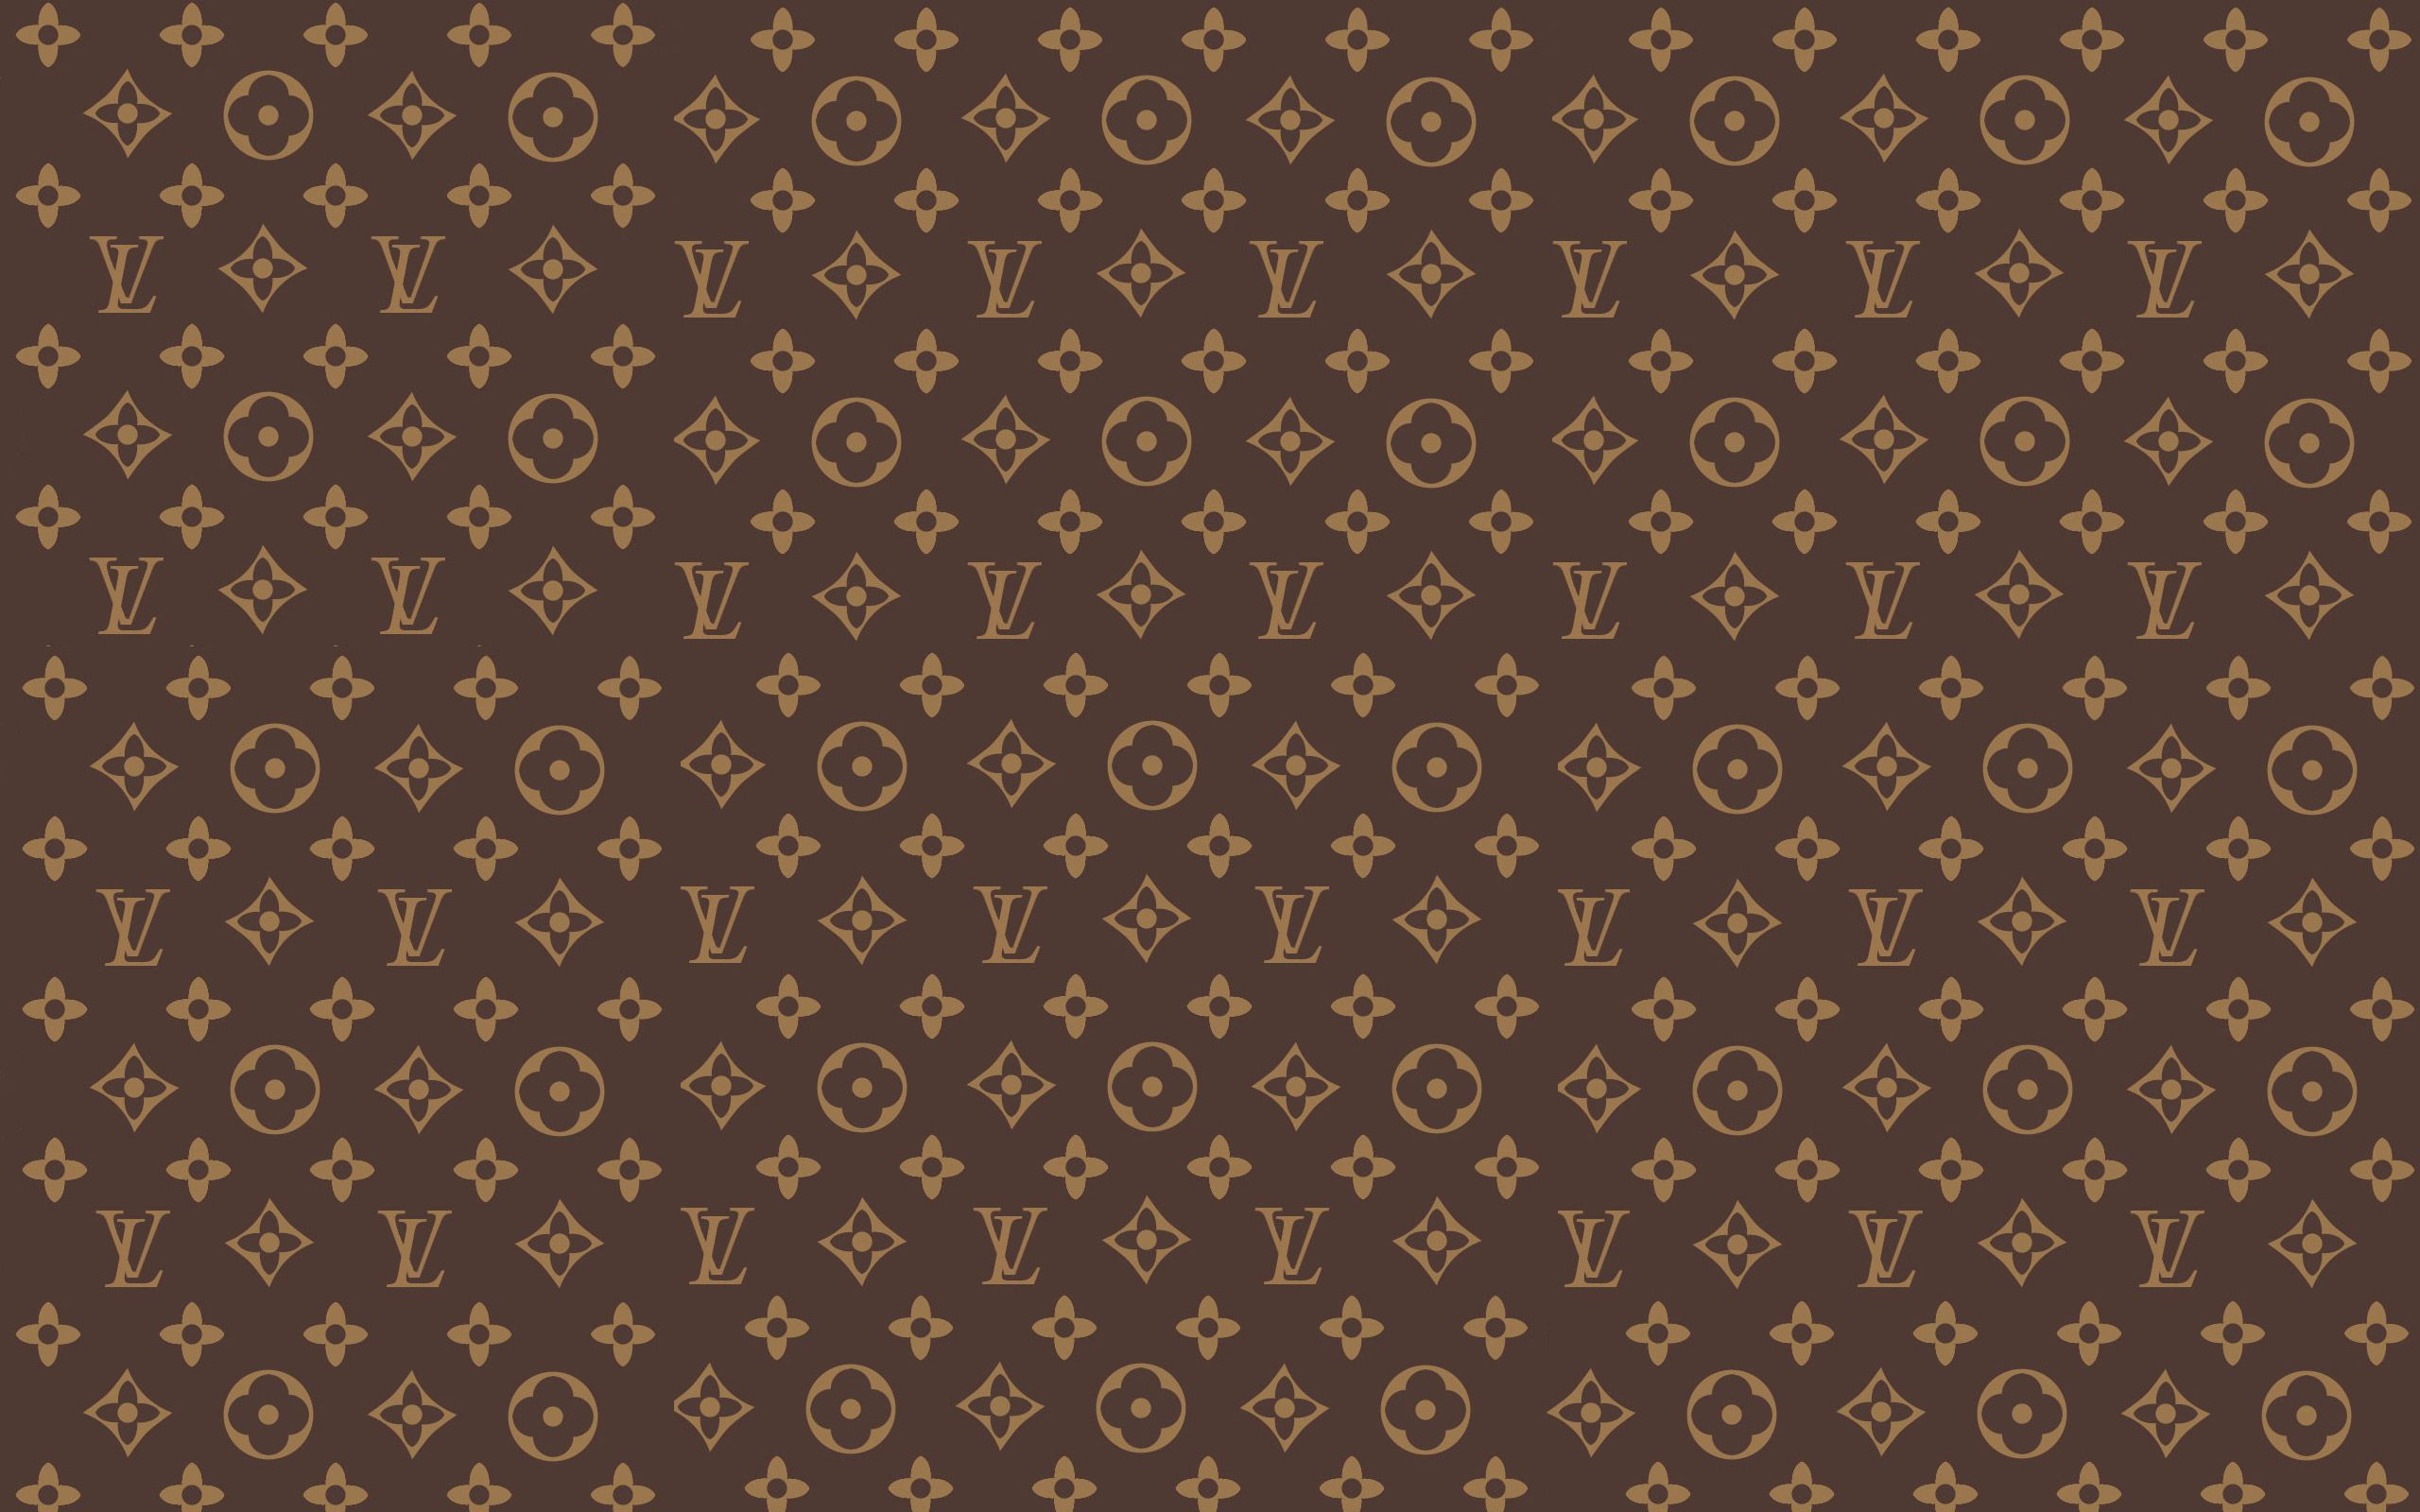 Download Style up your look with a Louis Vuitton print. Wallpaper